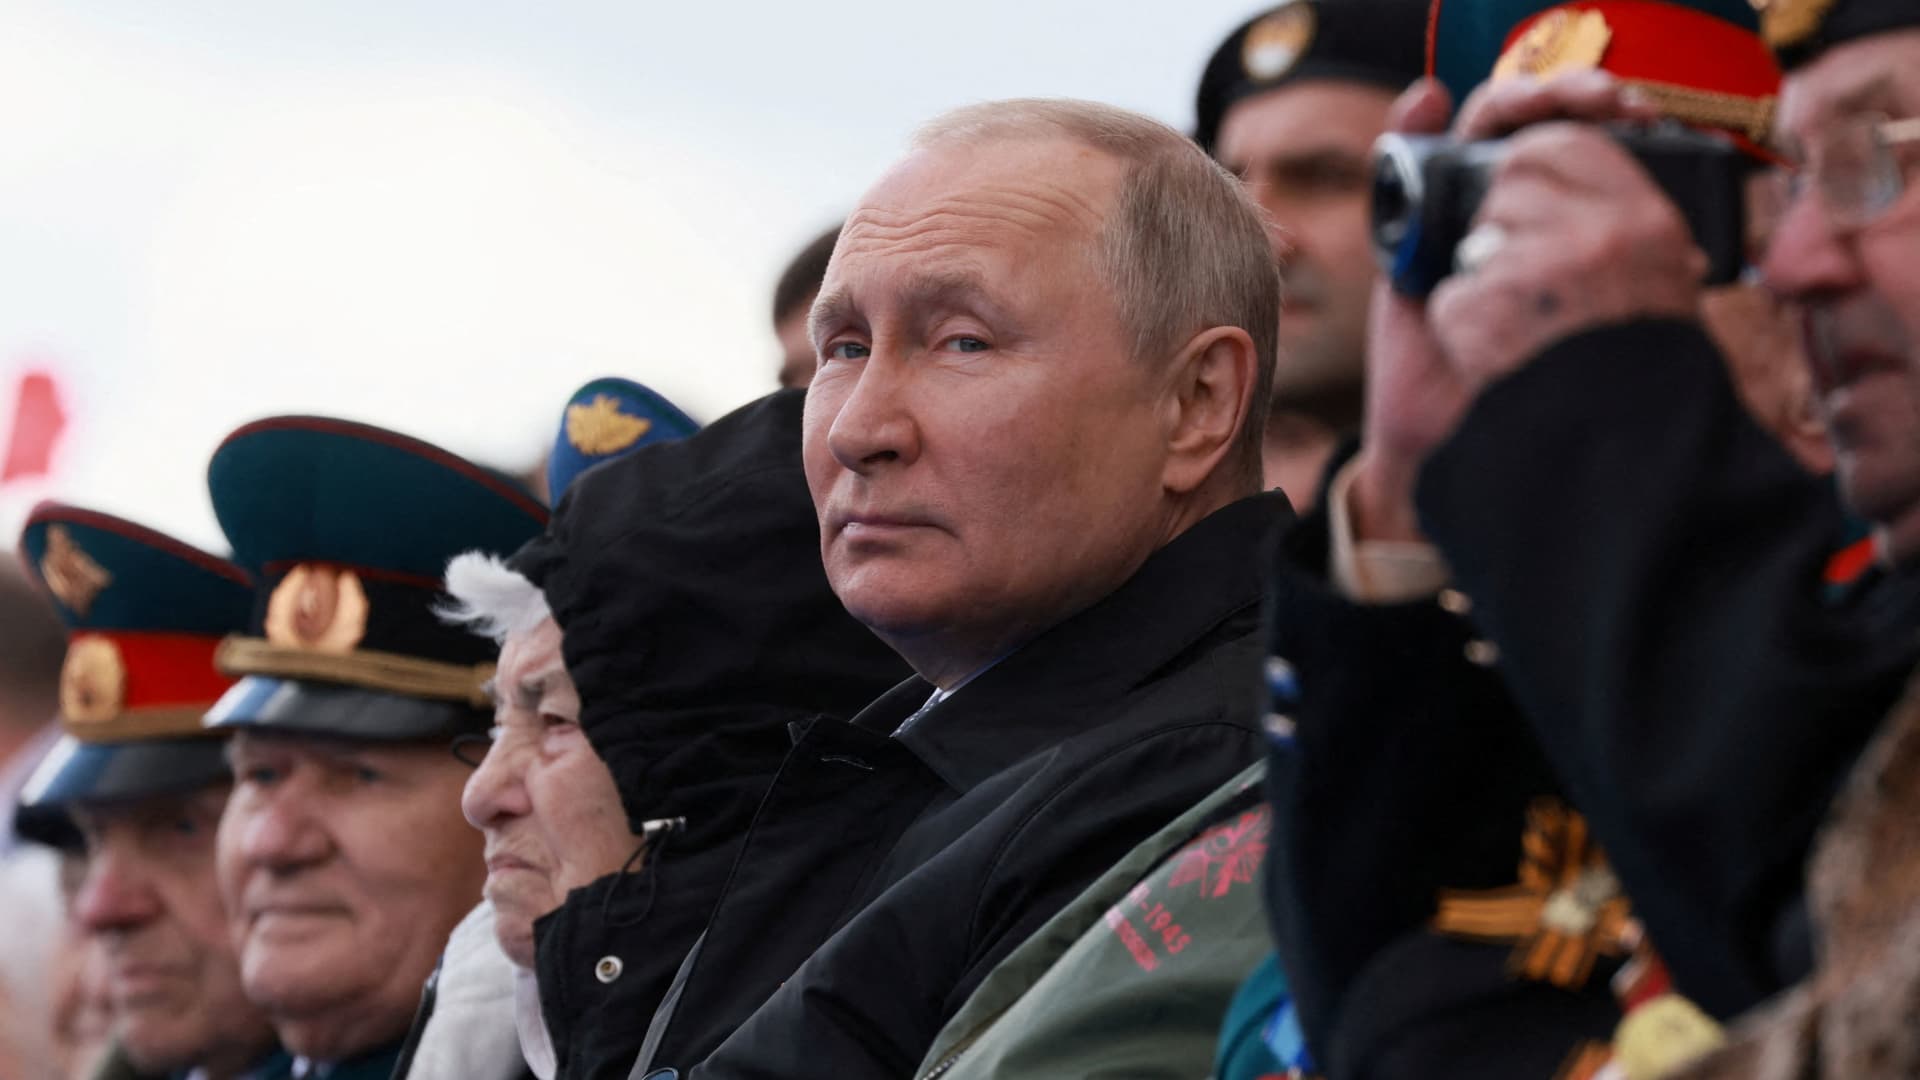 Russian President Vladimir Putin watches a military parade on Victory Day, which marks the 77th anniversary of the victory over Nazi Germany in World War Two, in Red Square in central Moscow, Russia May 9, 2022.